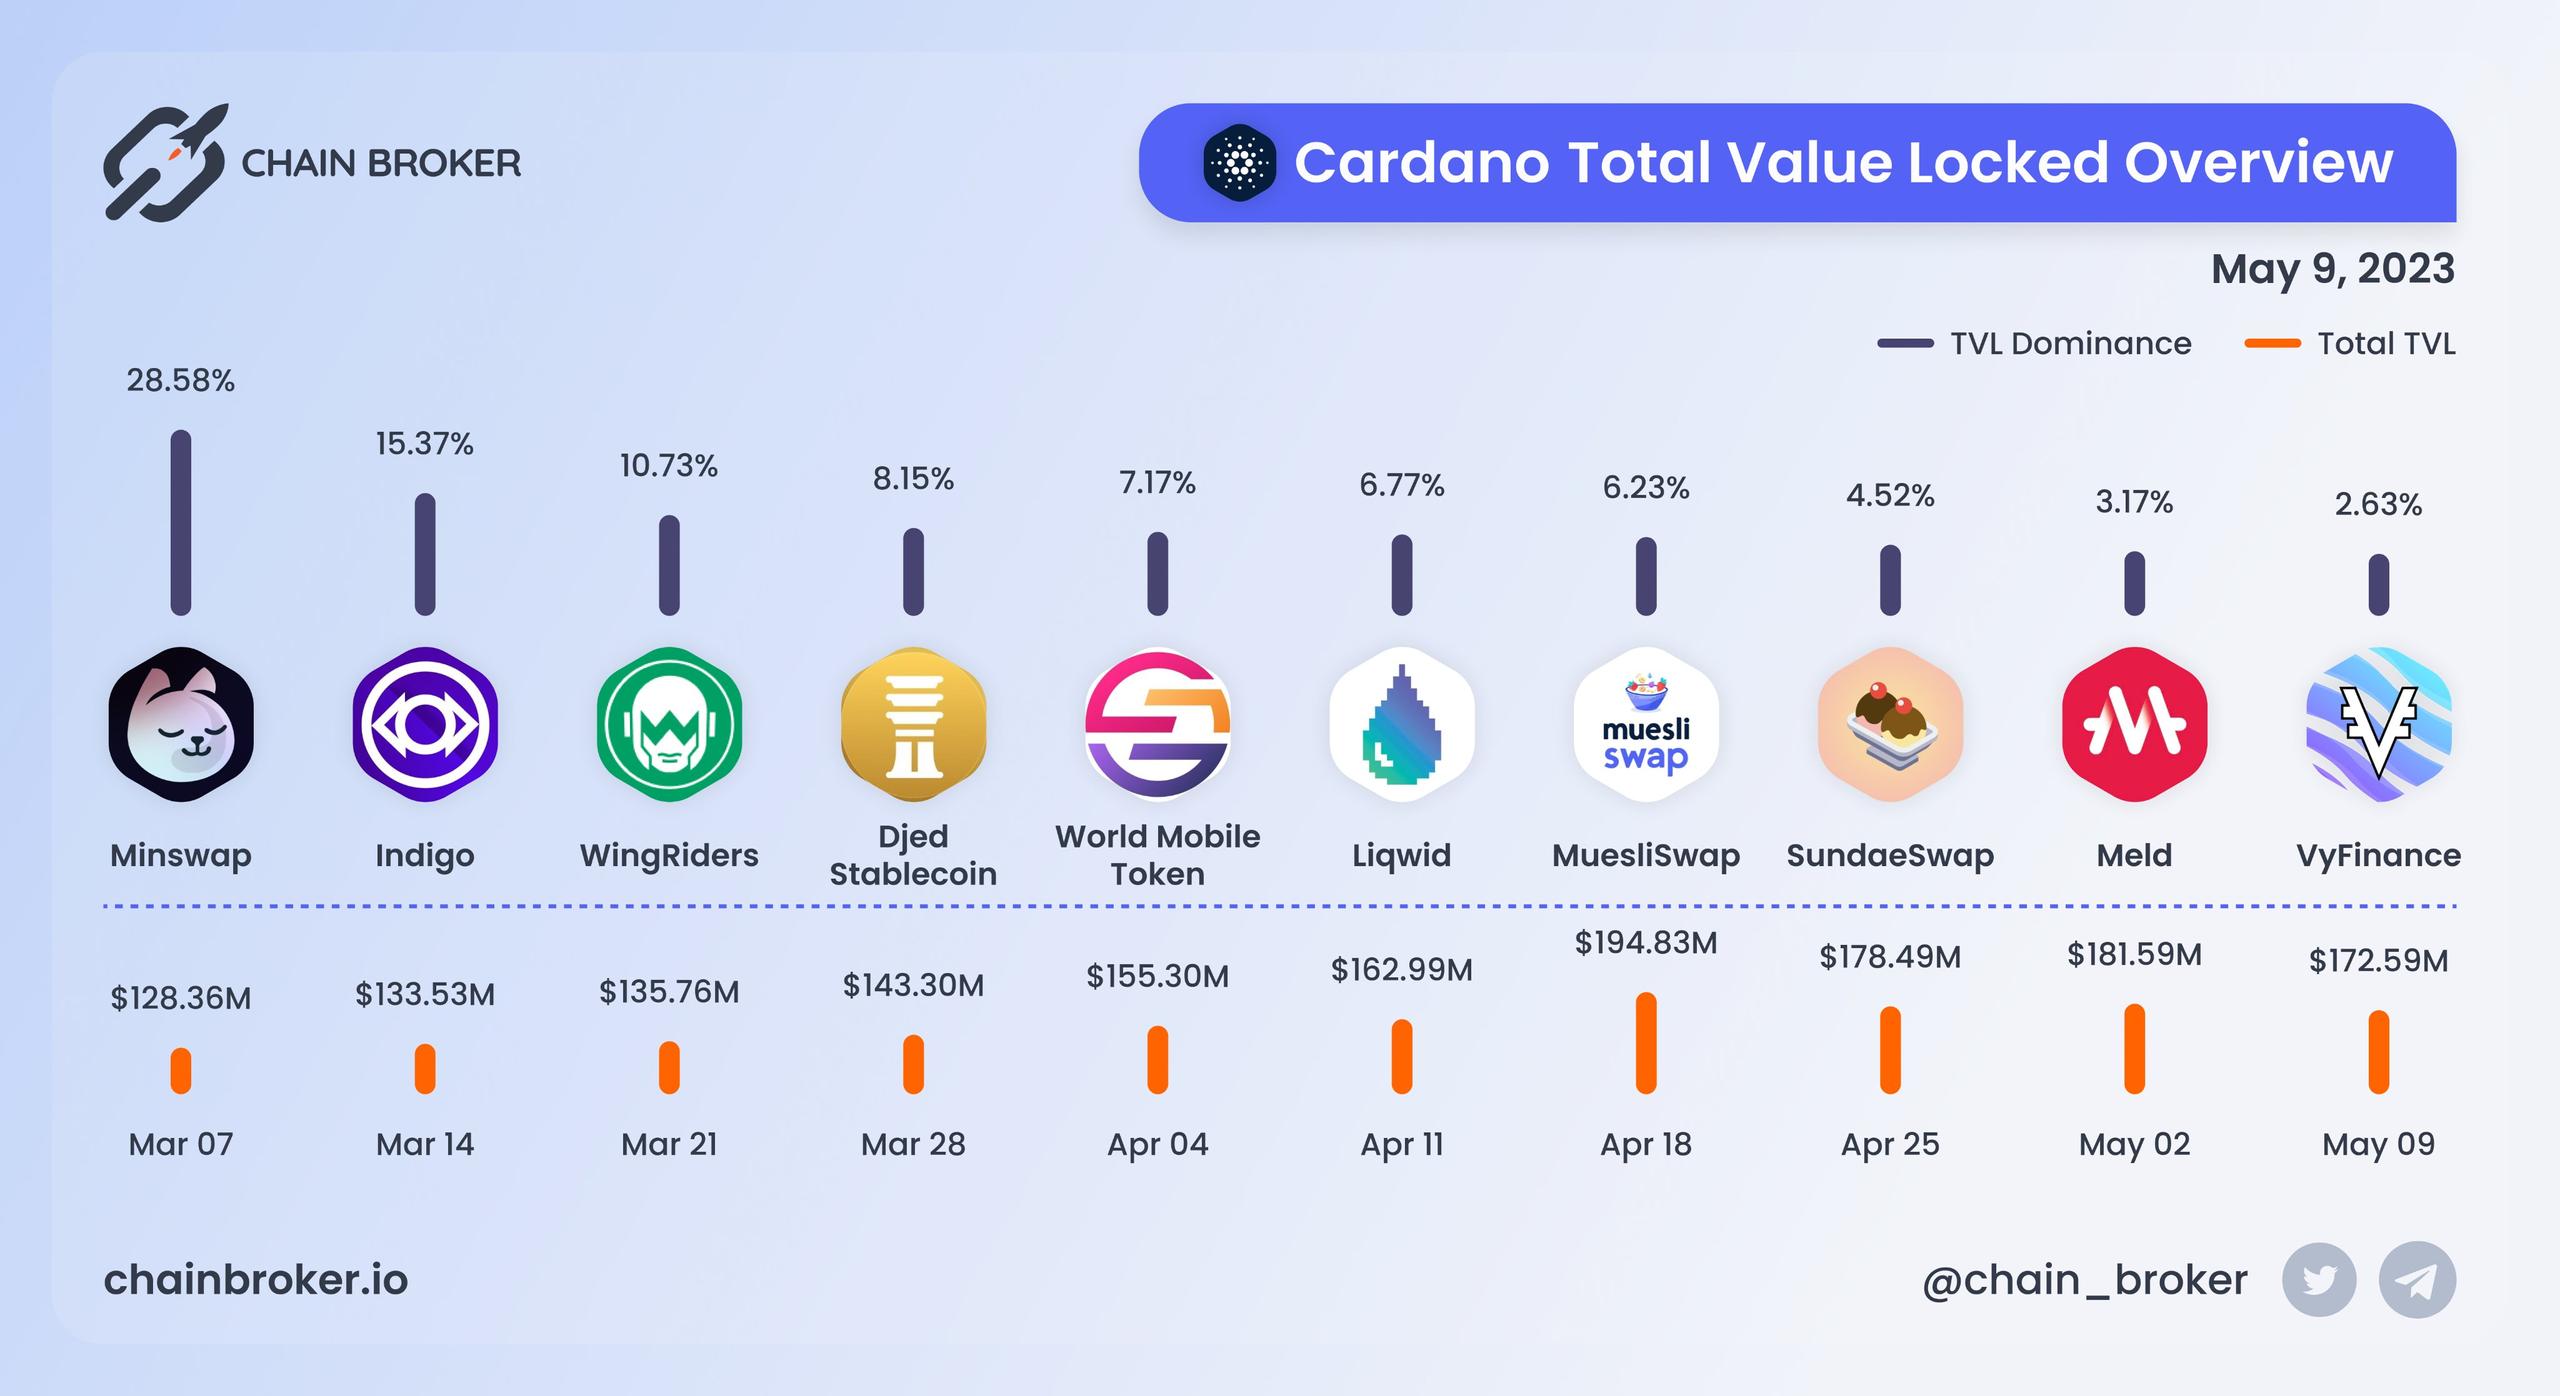 Cardano total value locked overview